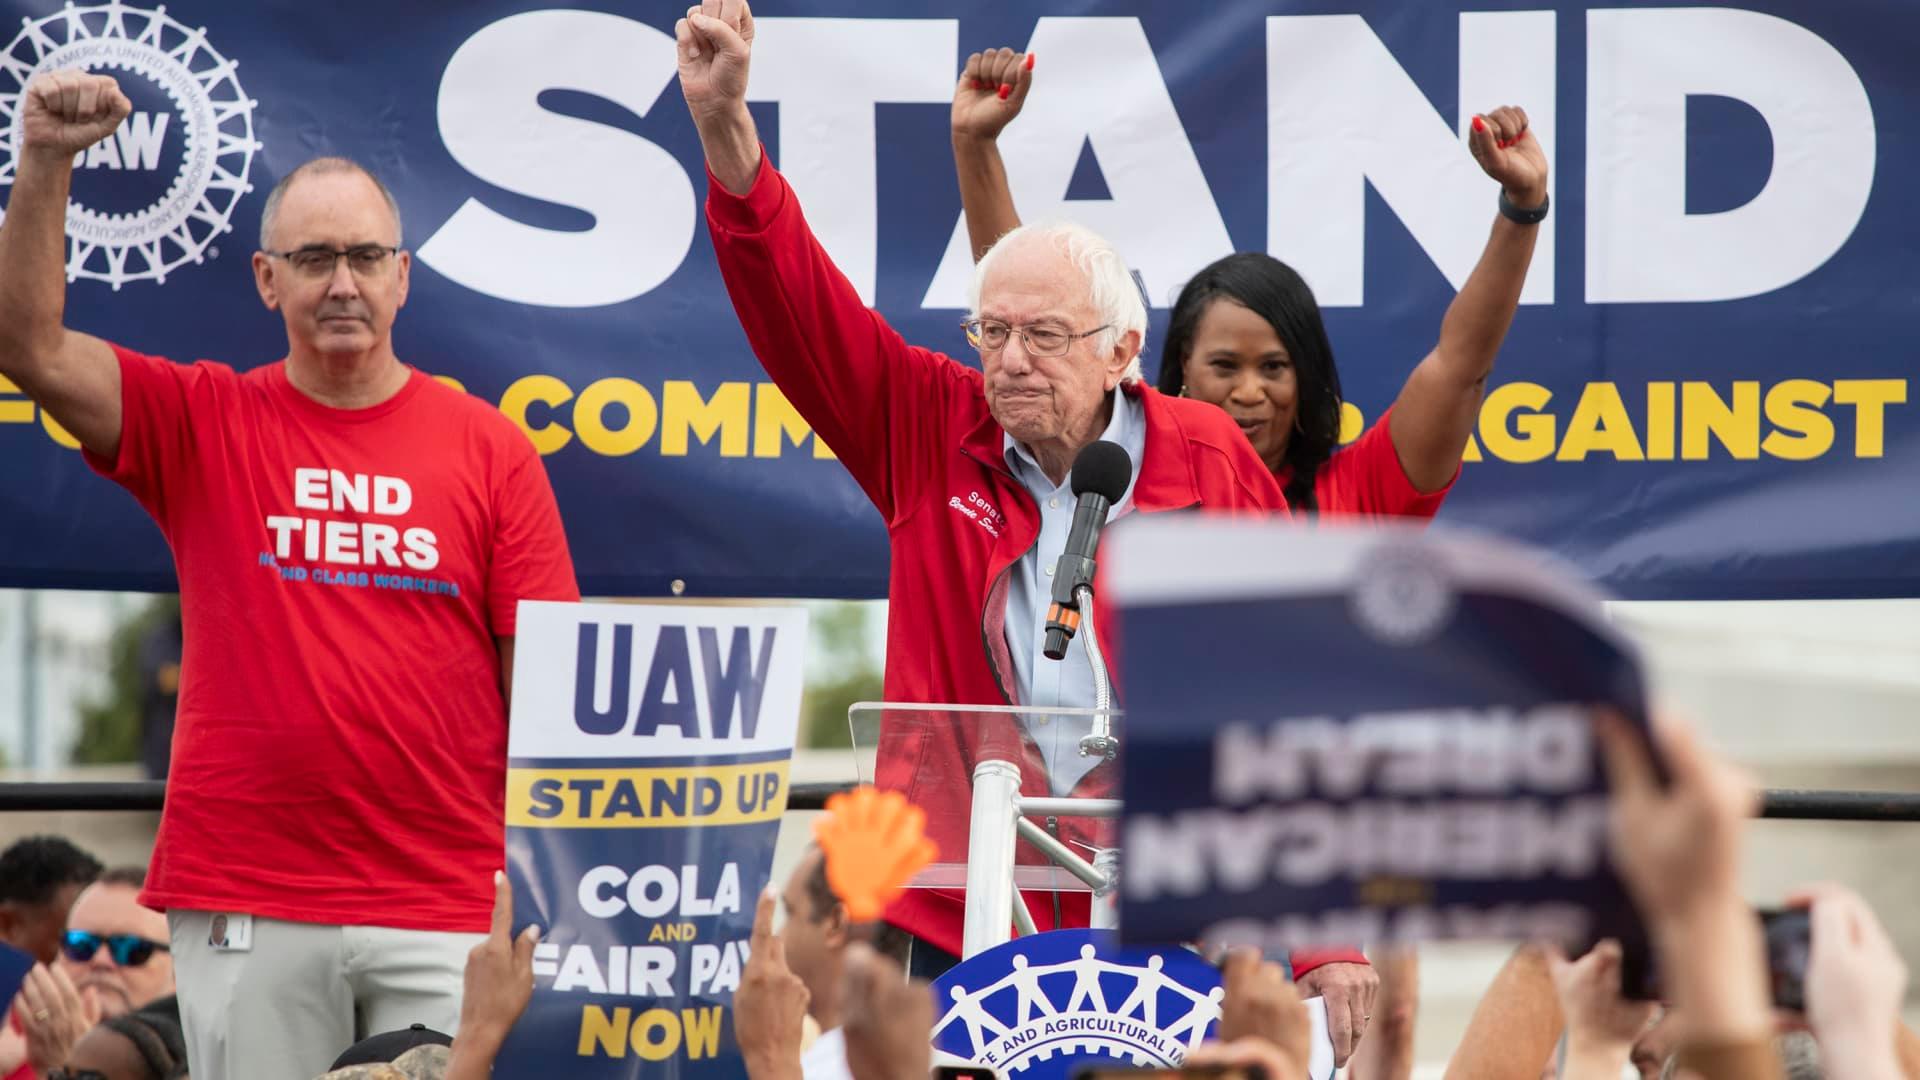 Sen. Bernie Sanders calls out automaker CEOs at UAW strike rally: ‘It is time for you to end your greed’